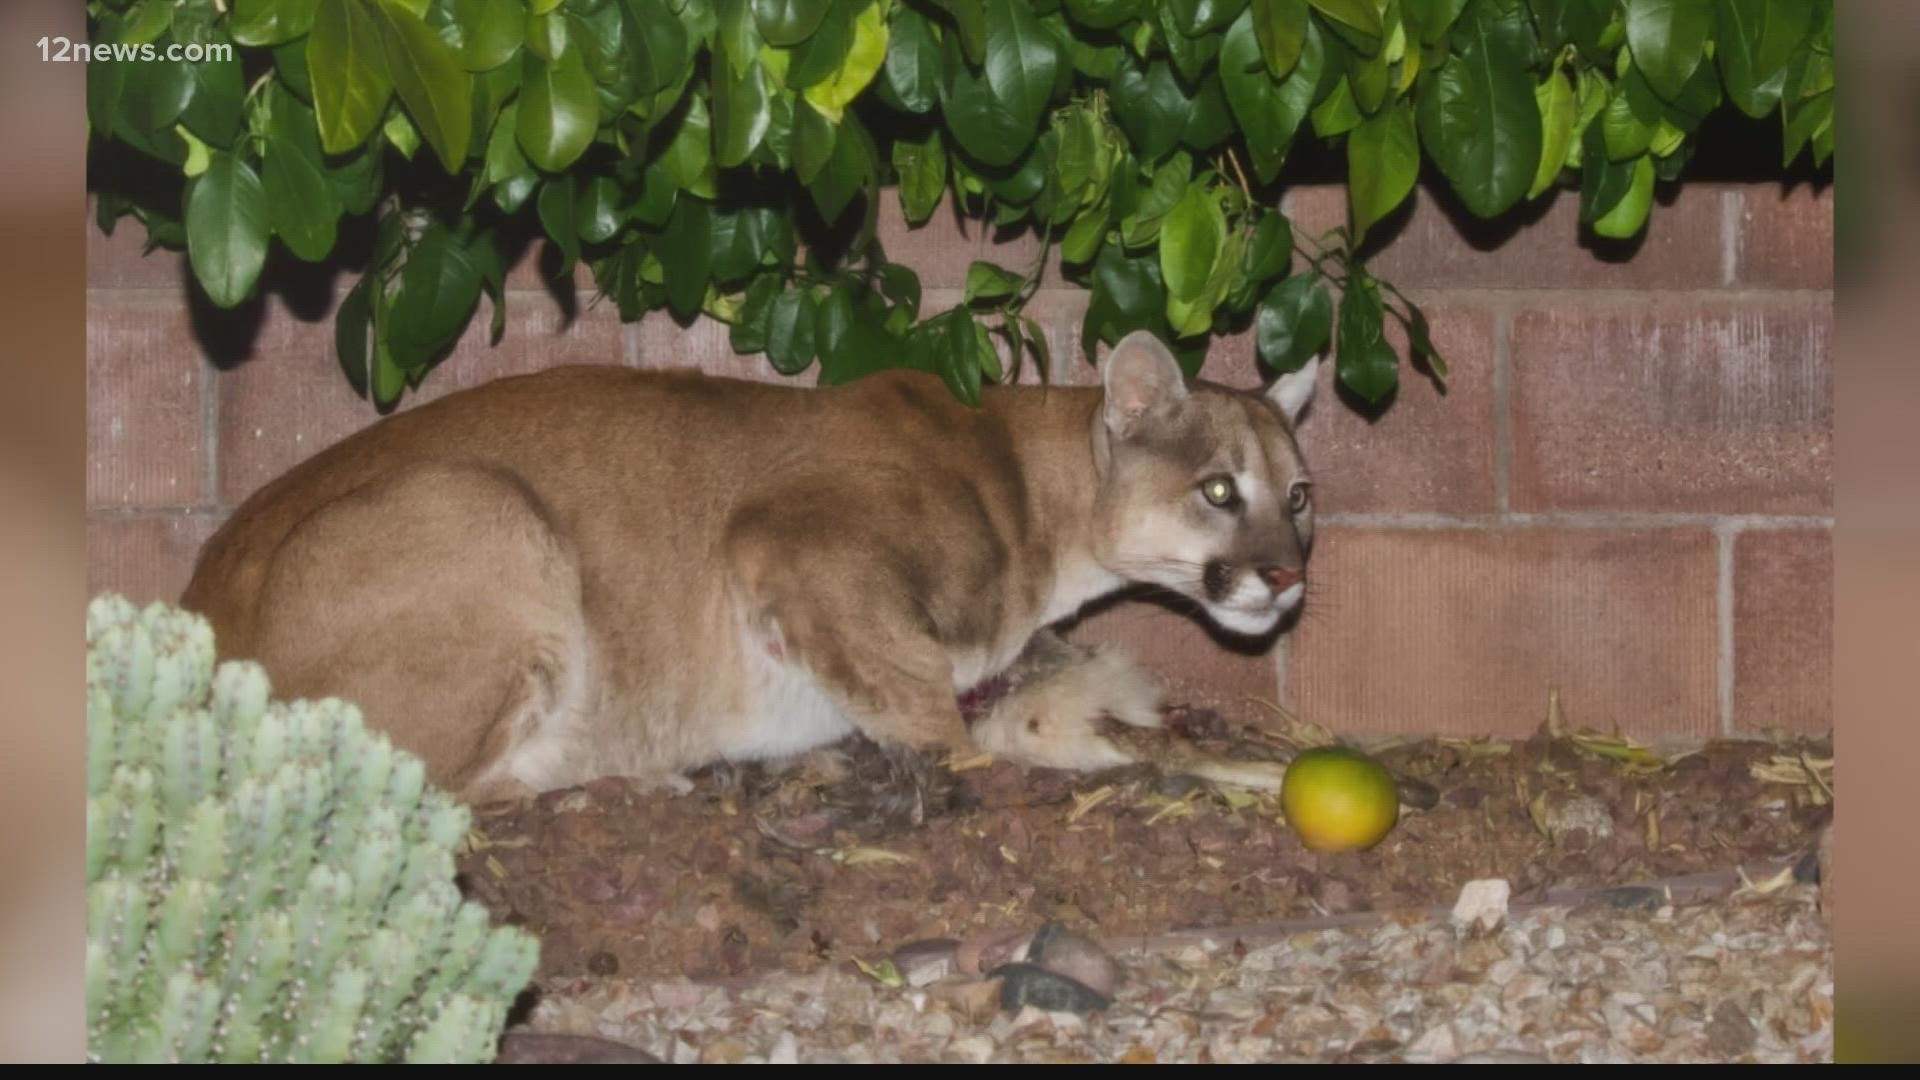 A mountain lion thought it had found a cozy, secure place to enjoy a meal.